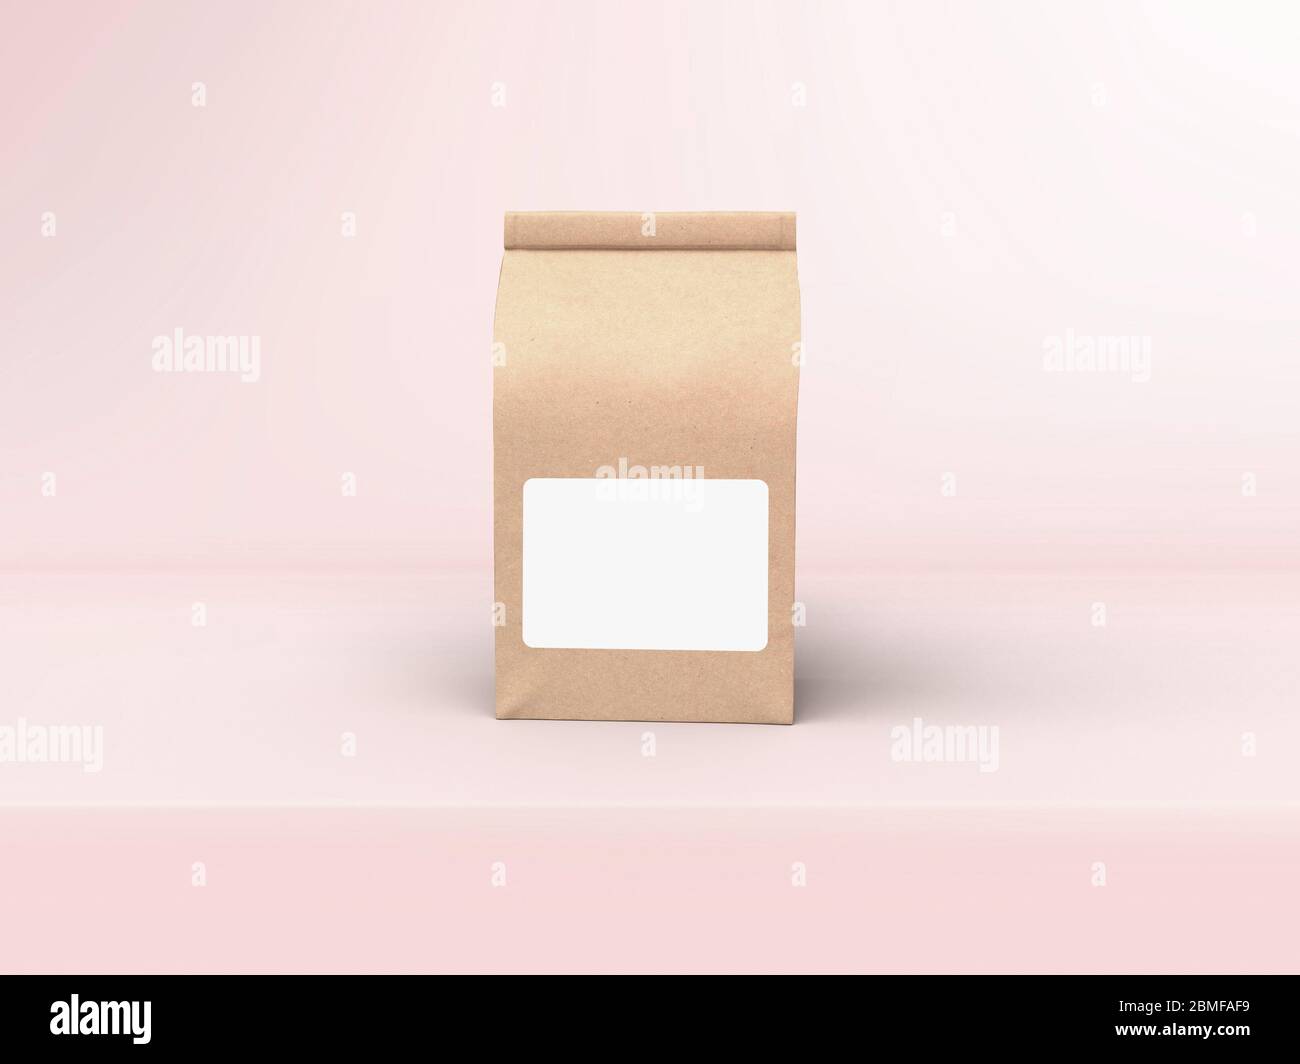 The coffee beam bag packaging mock-up design on pastel pink studio stage background Stock Photo